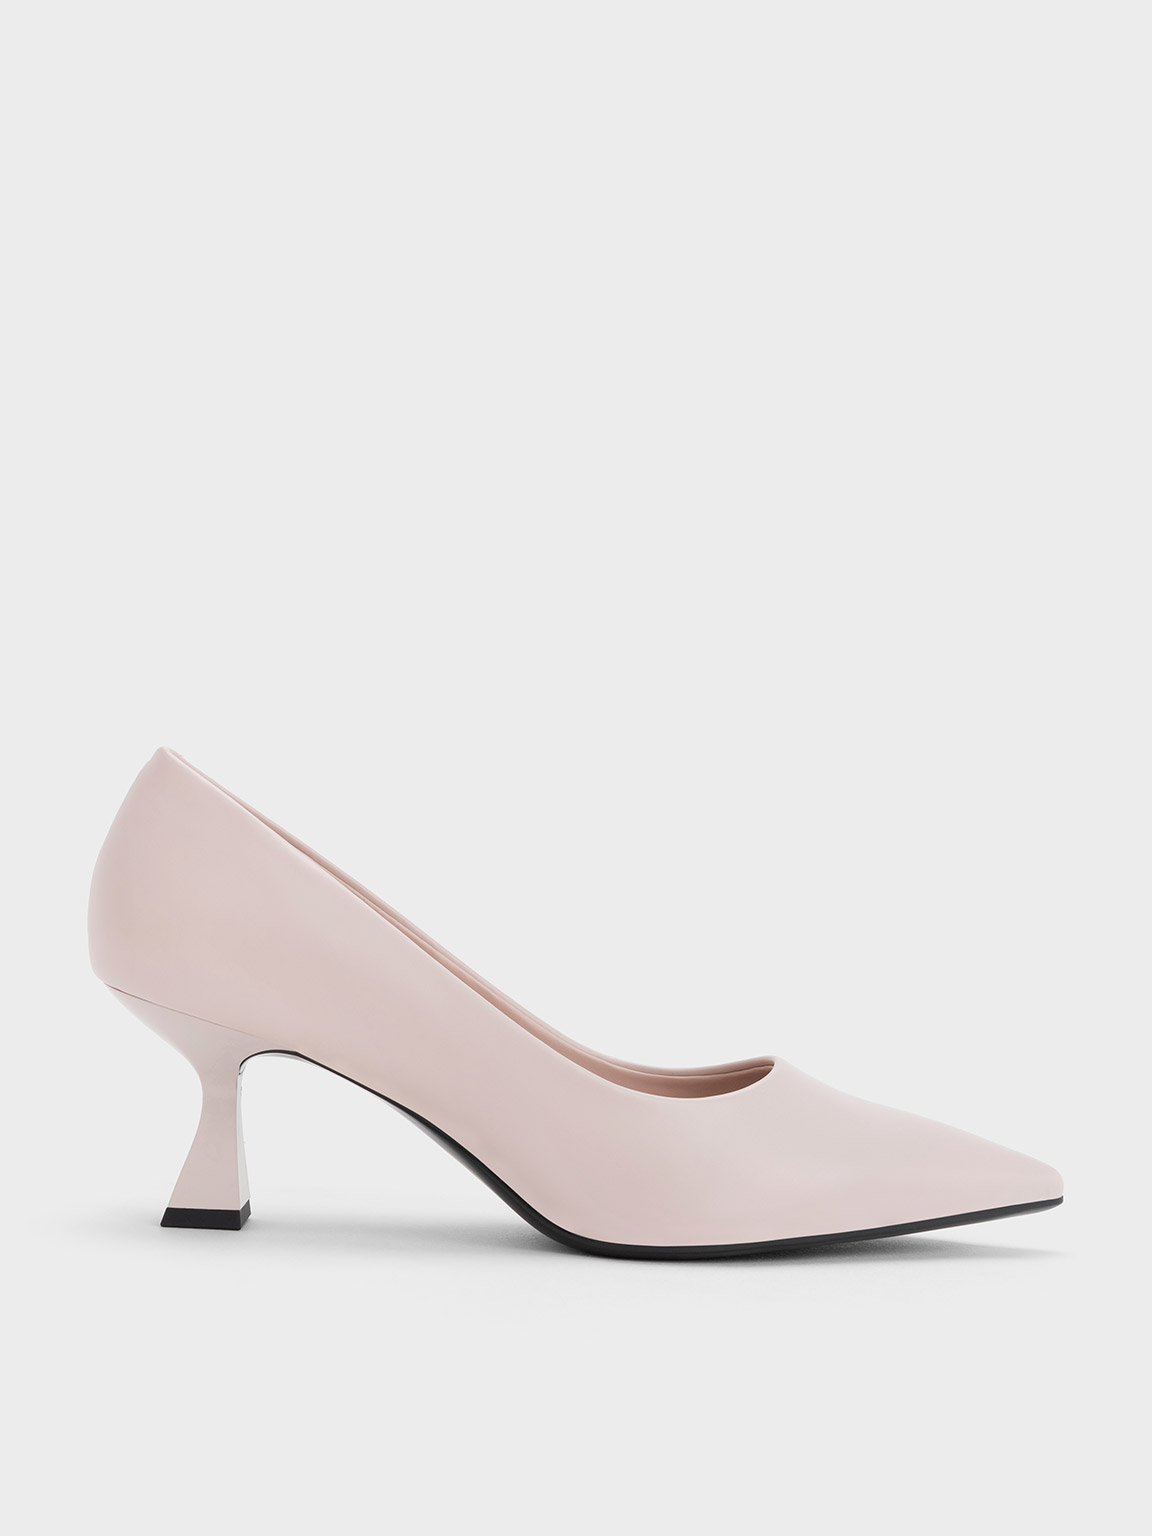 Nude Pointed-Toe Flared Pumps - CHARLES & KEITH US